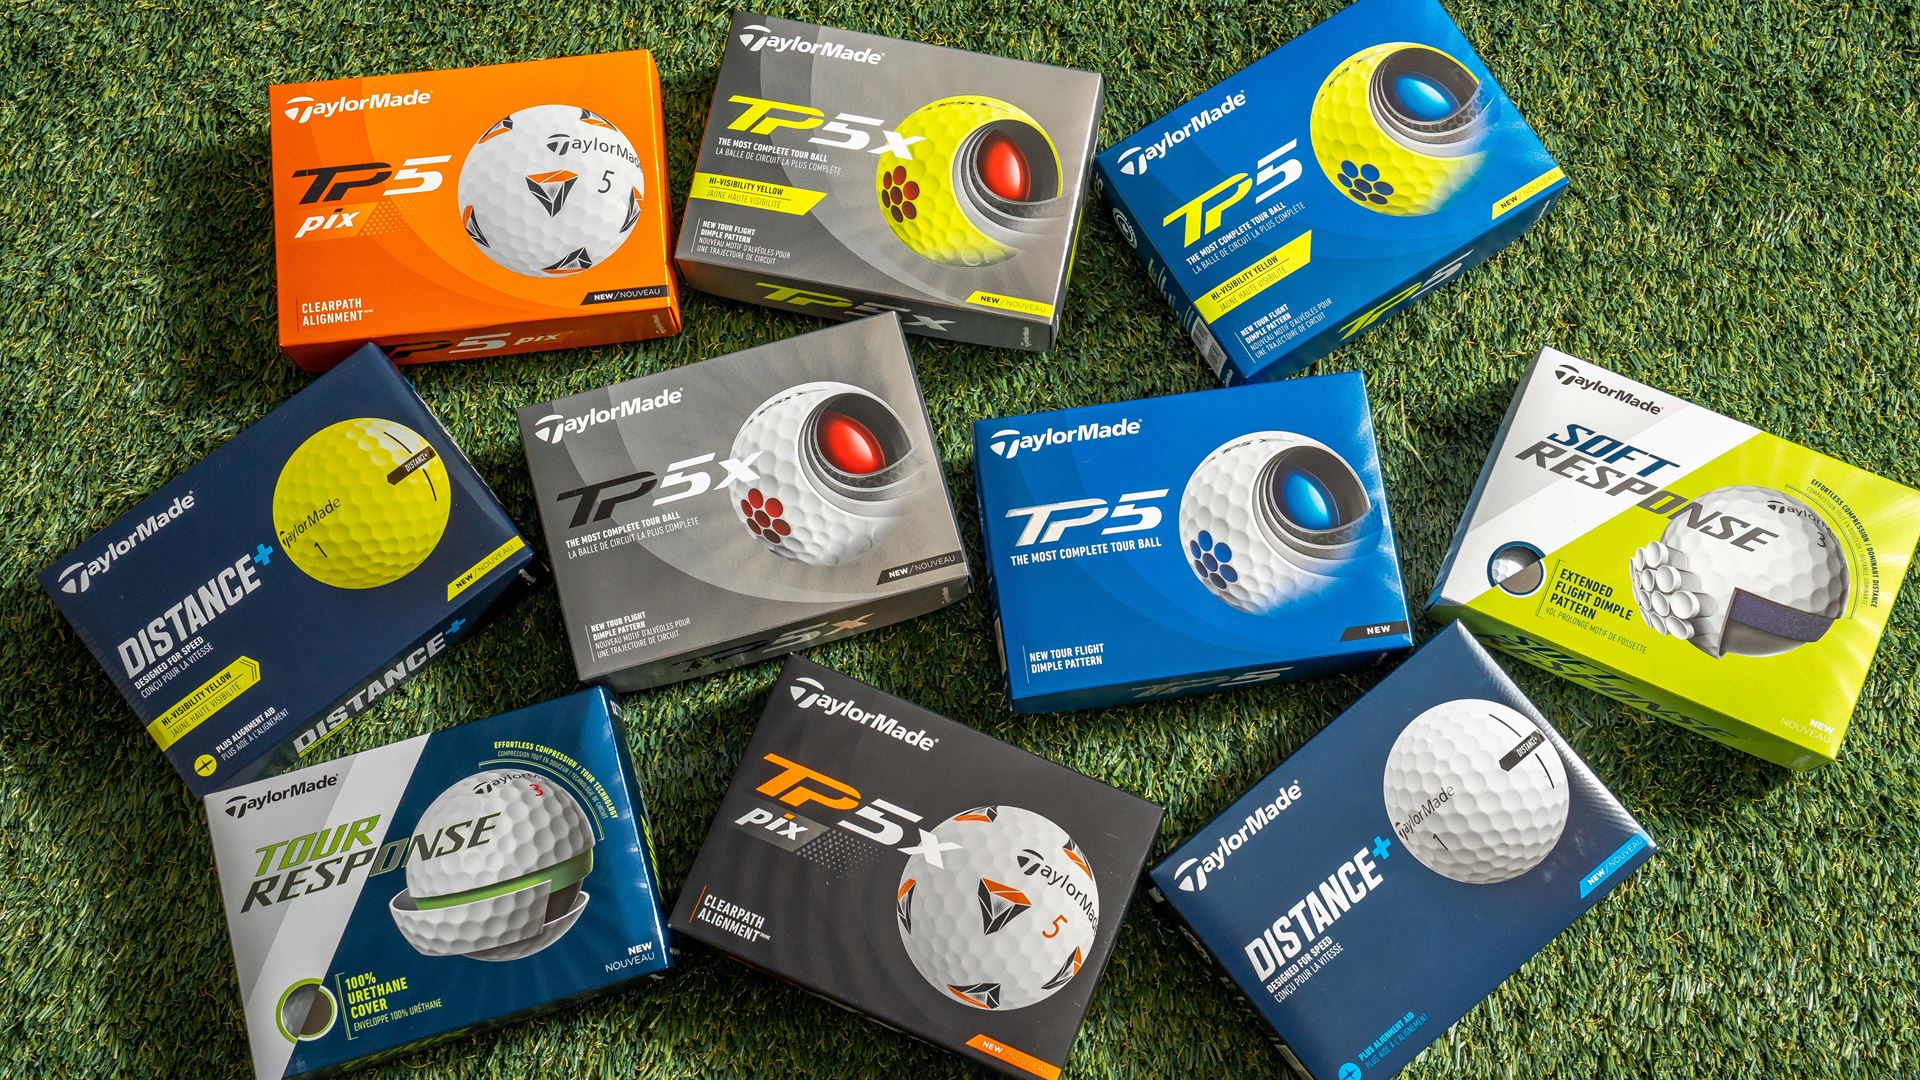 TaylorMade Golf Company Takes a Major Leap On The Path to Distance With The New TP5 and TP5x Golf Ball